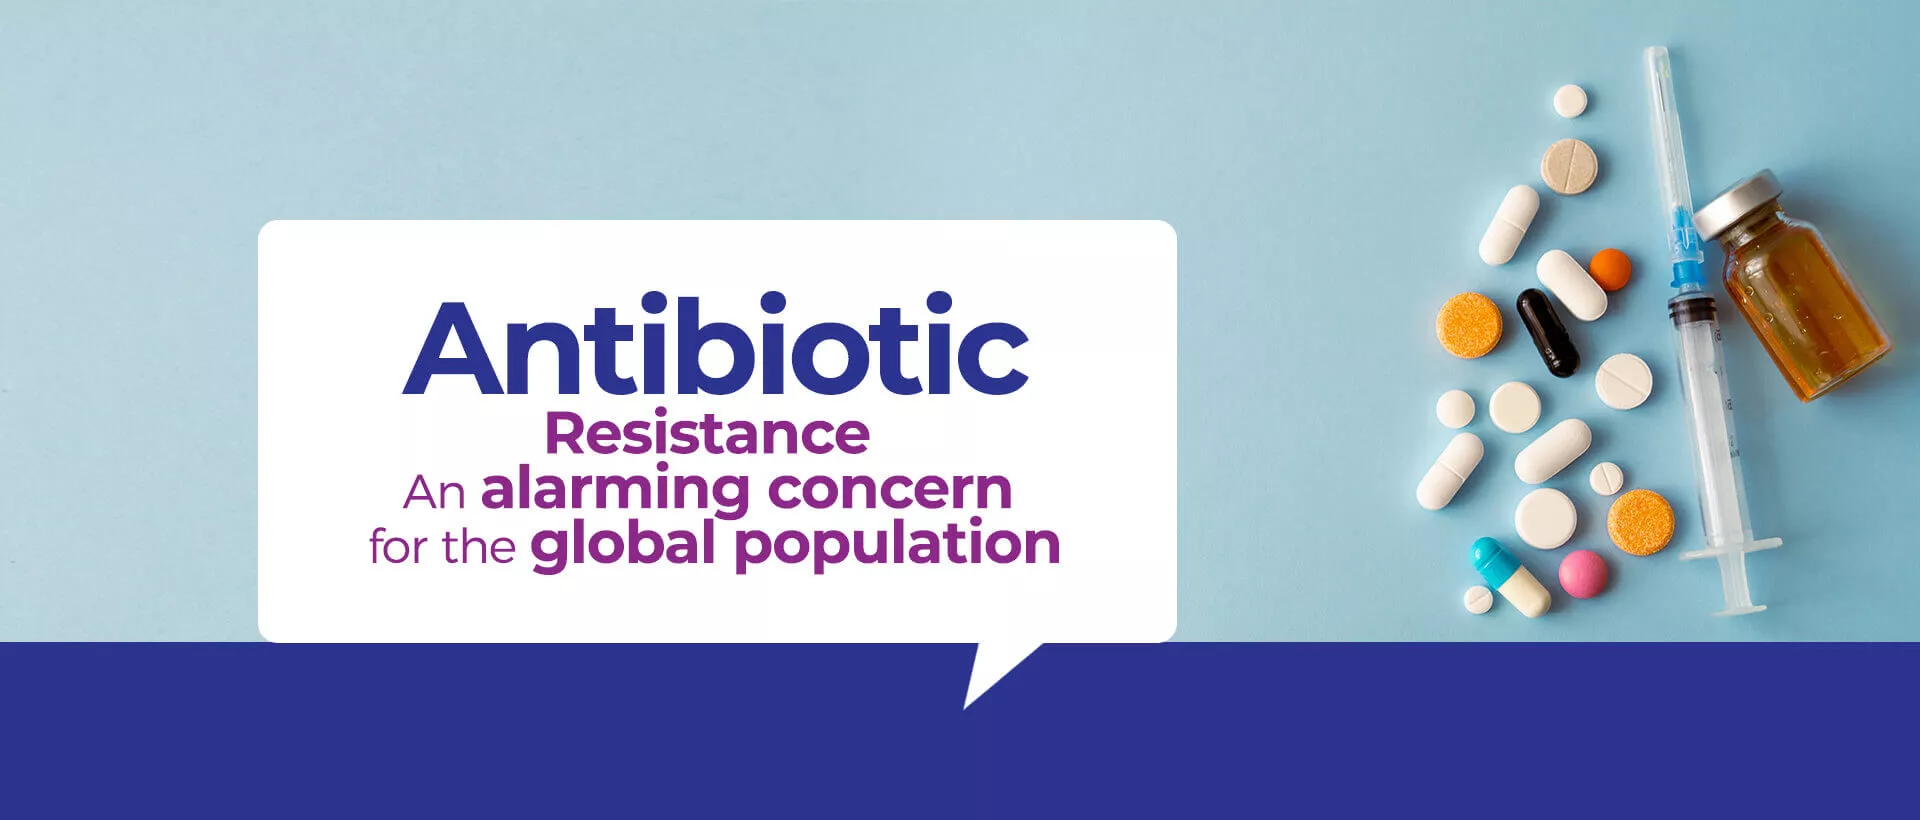 Antibiotic Resistance- An alarming concern for the global population